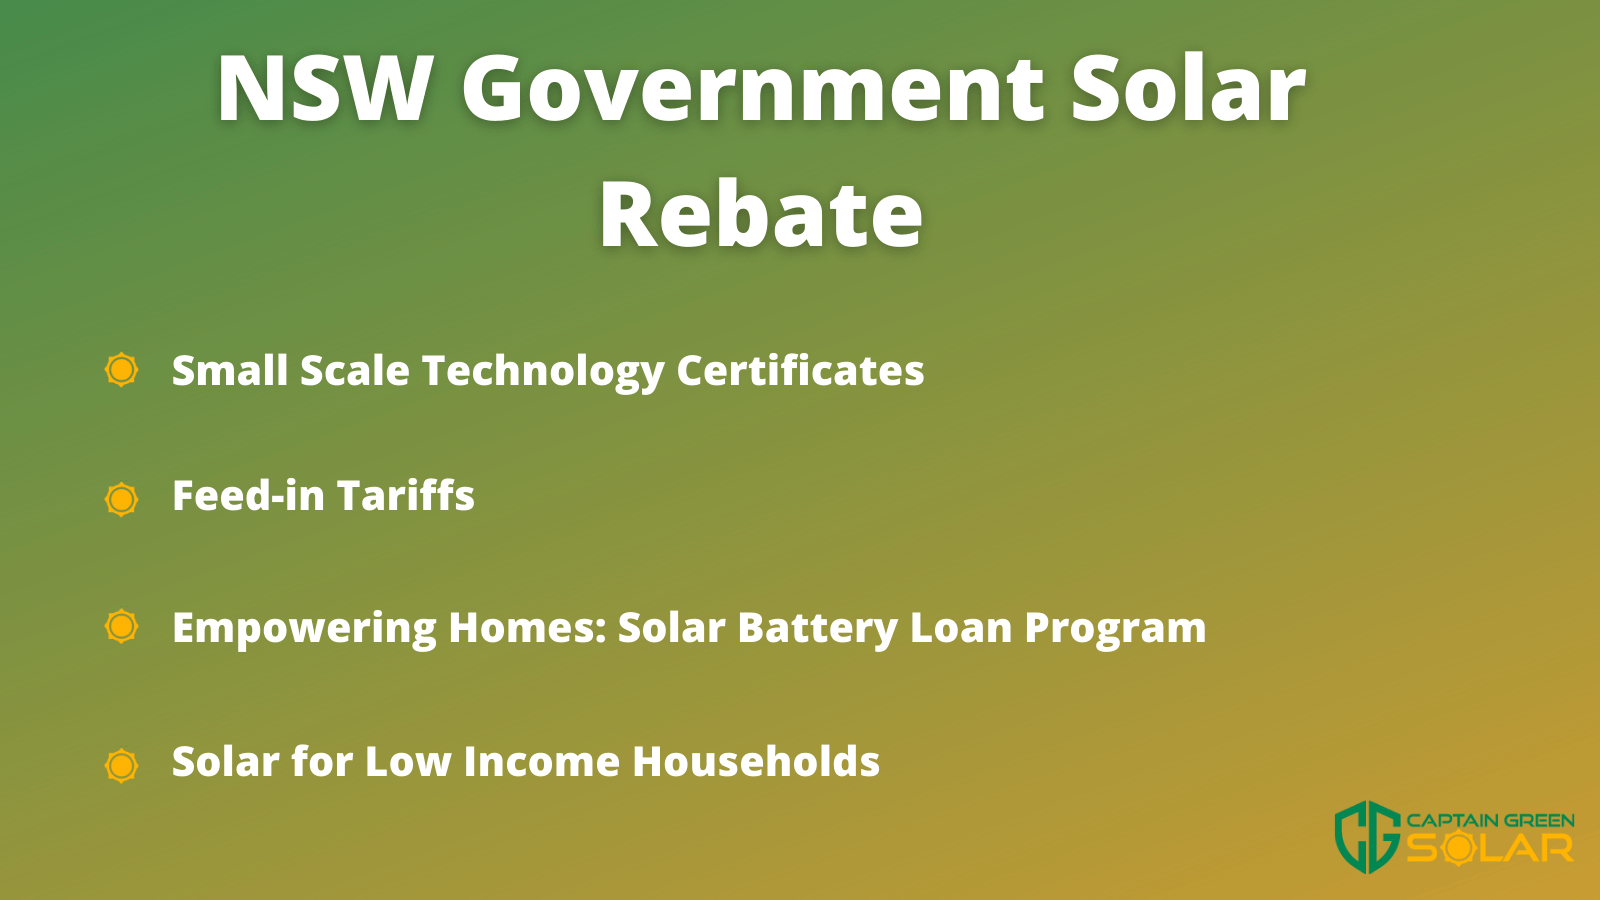 NSW Government Solar Rebate Points